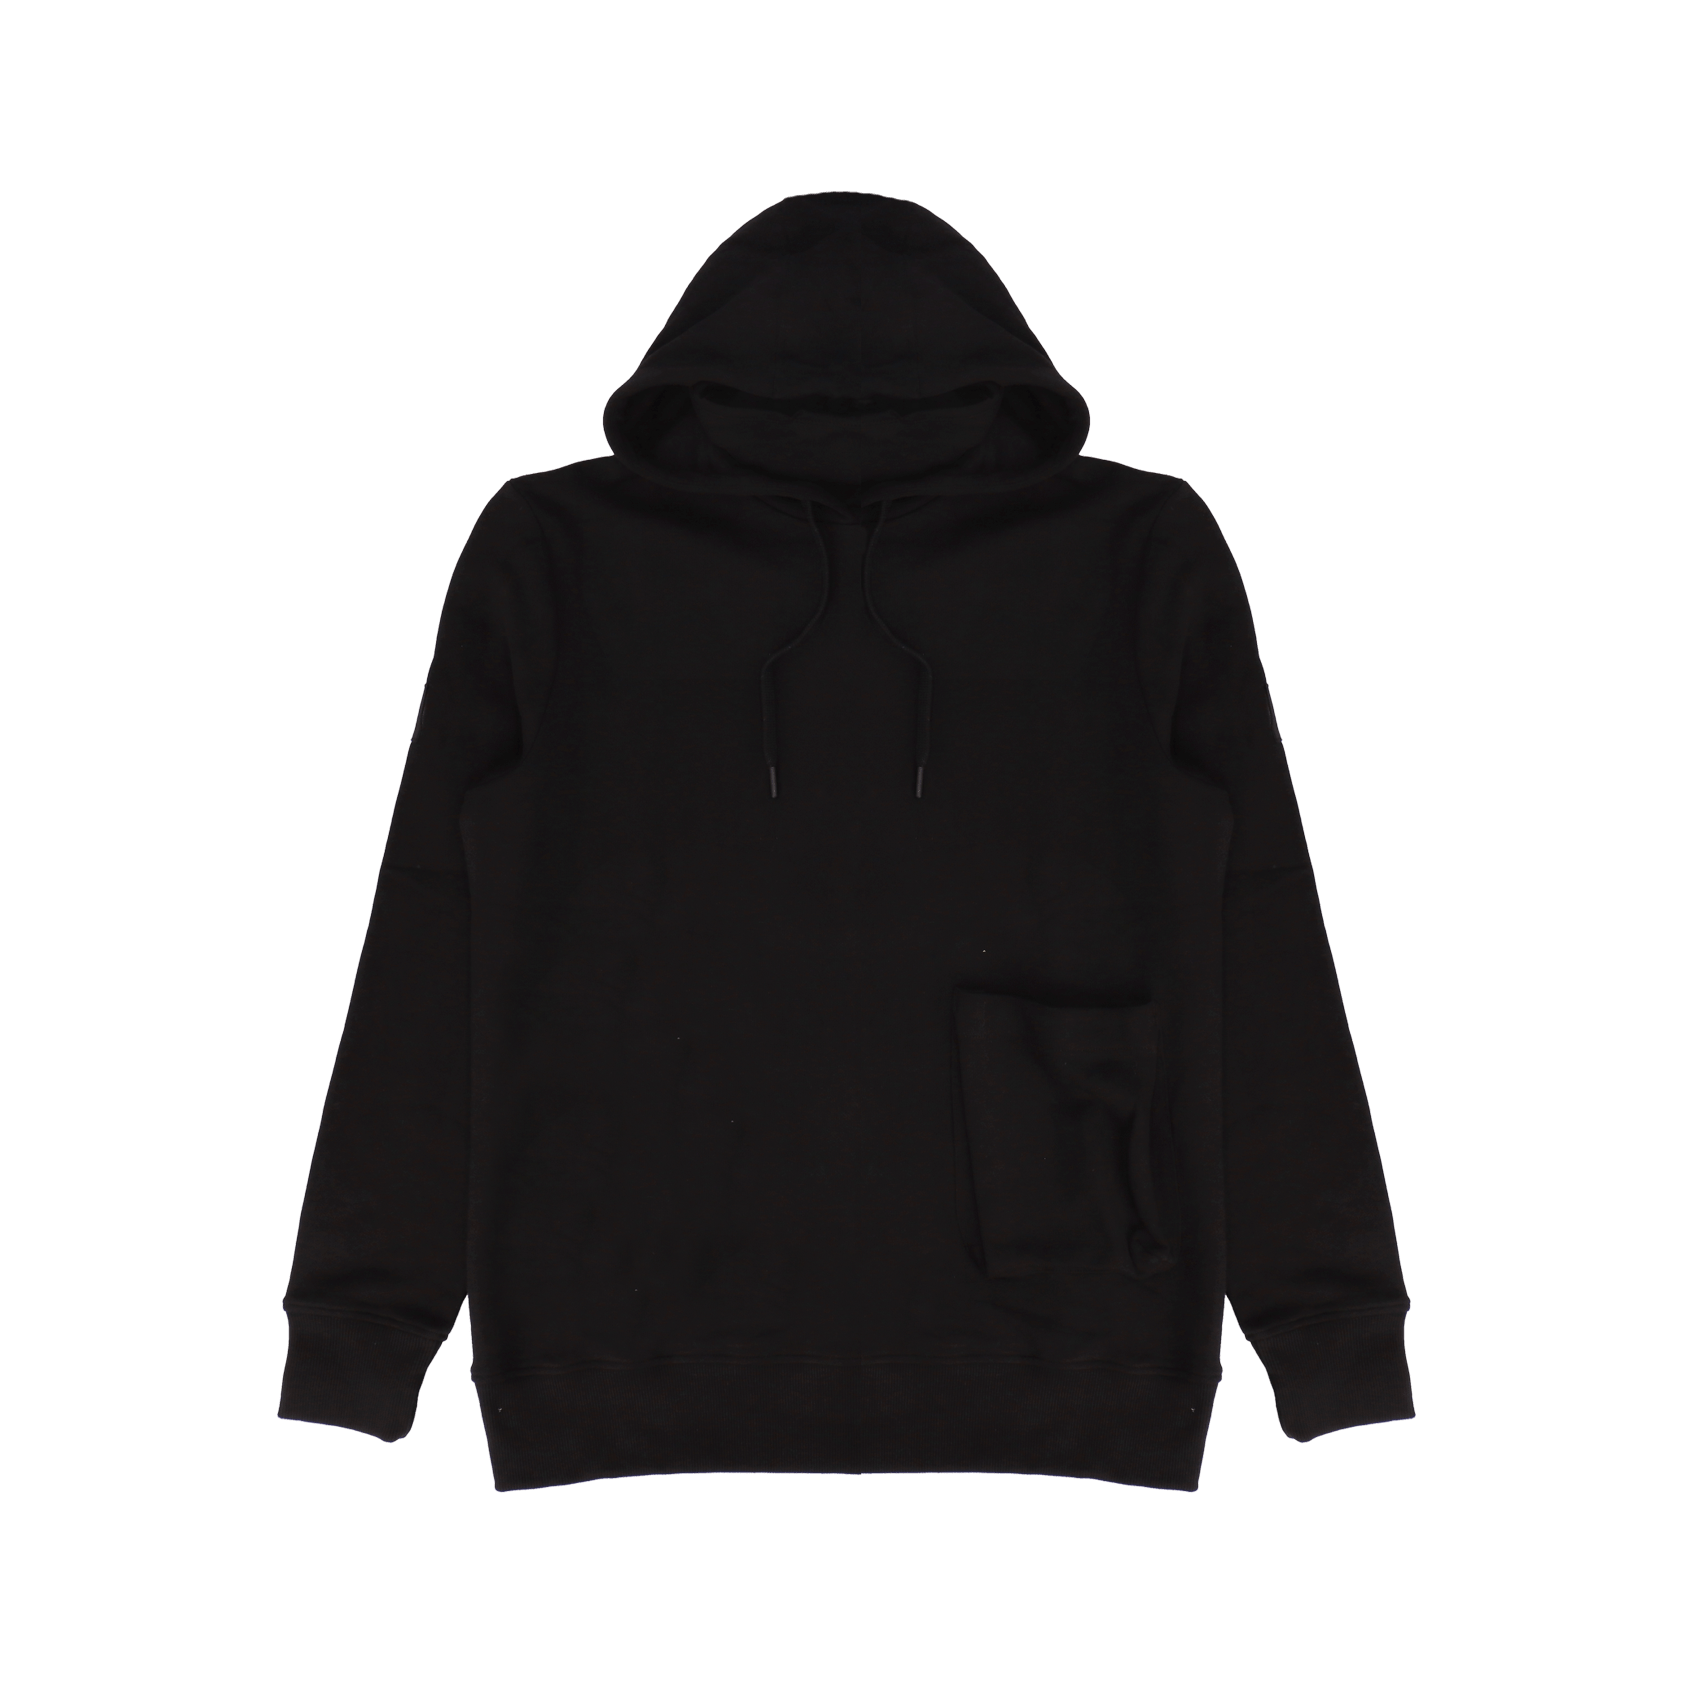 Face Covered Hoodie - Jet Black.